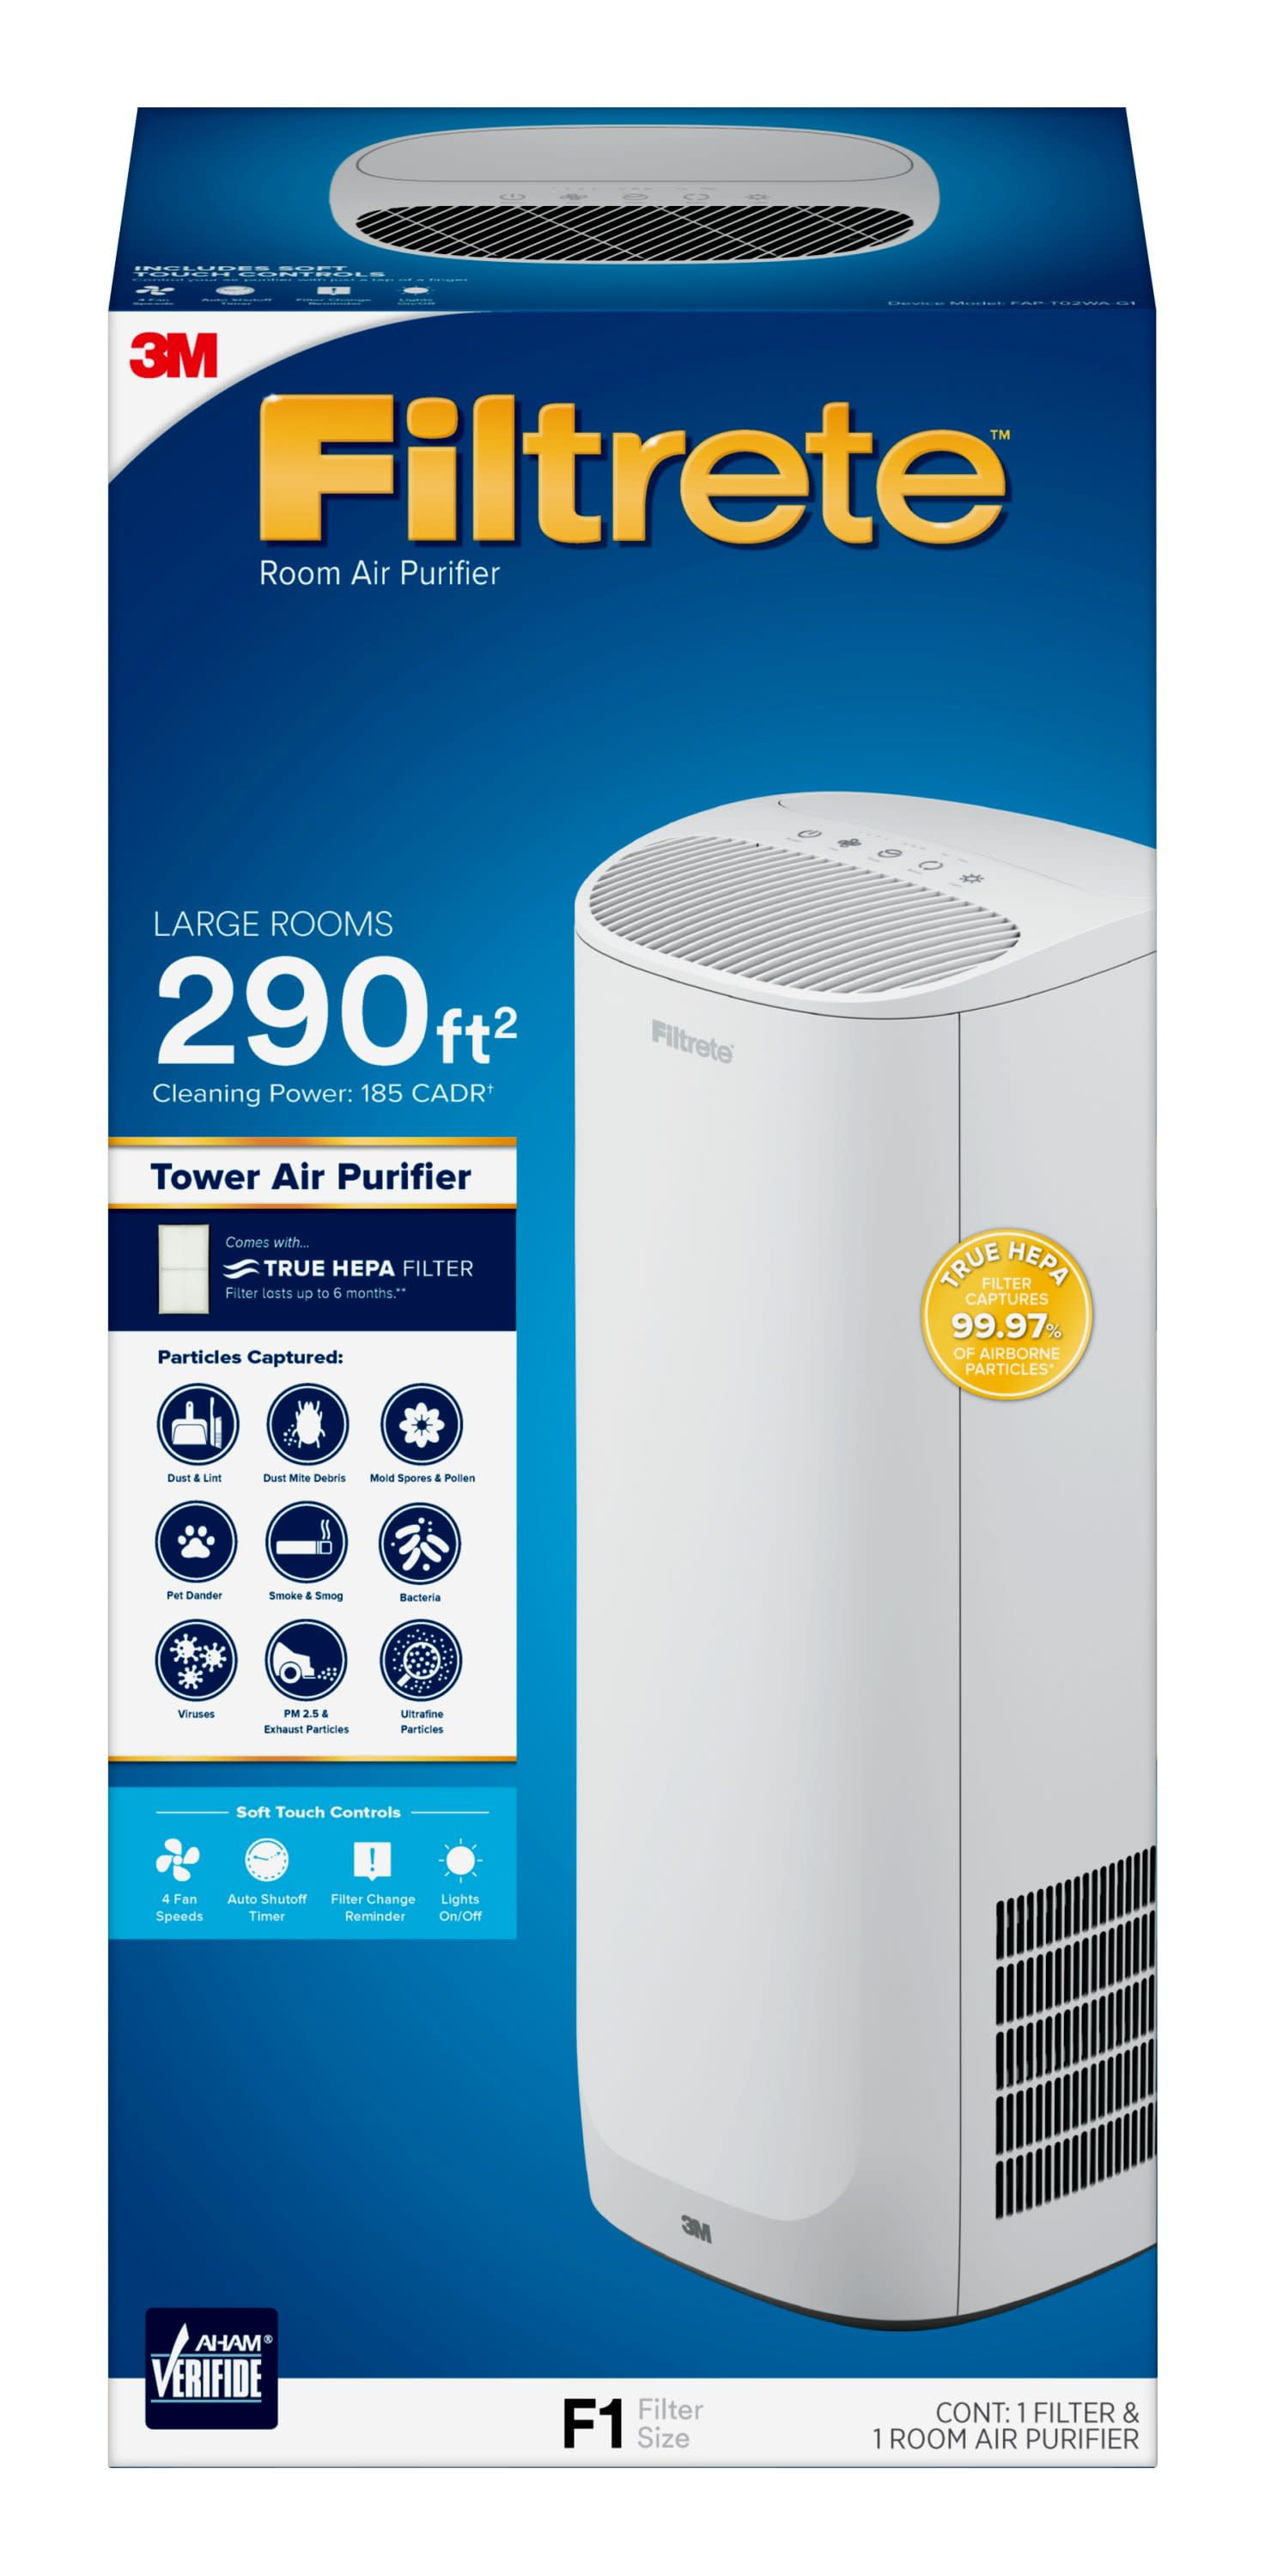 filtrete-by-3m-room-air-purifier-large-room-tower-290-sq-ft-coverage